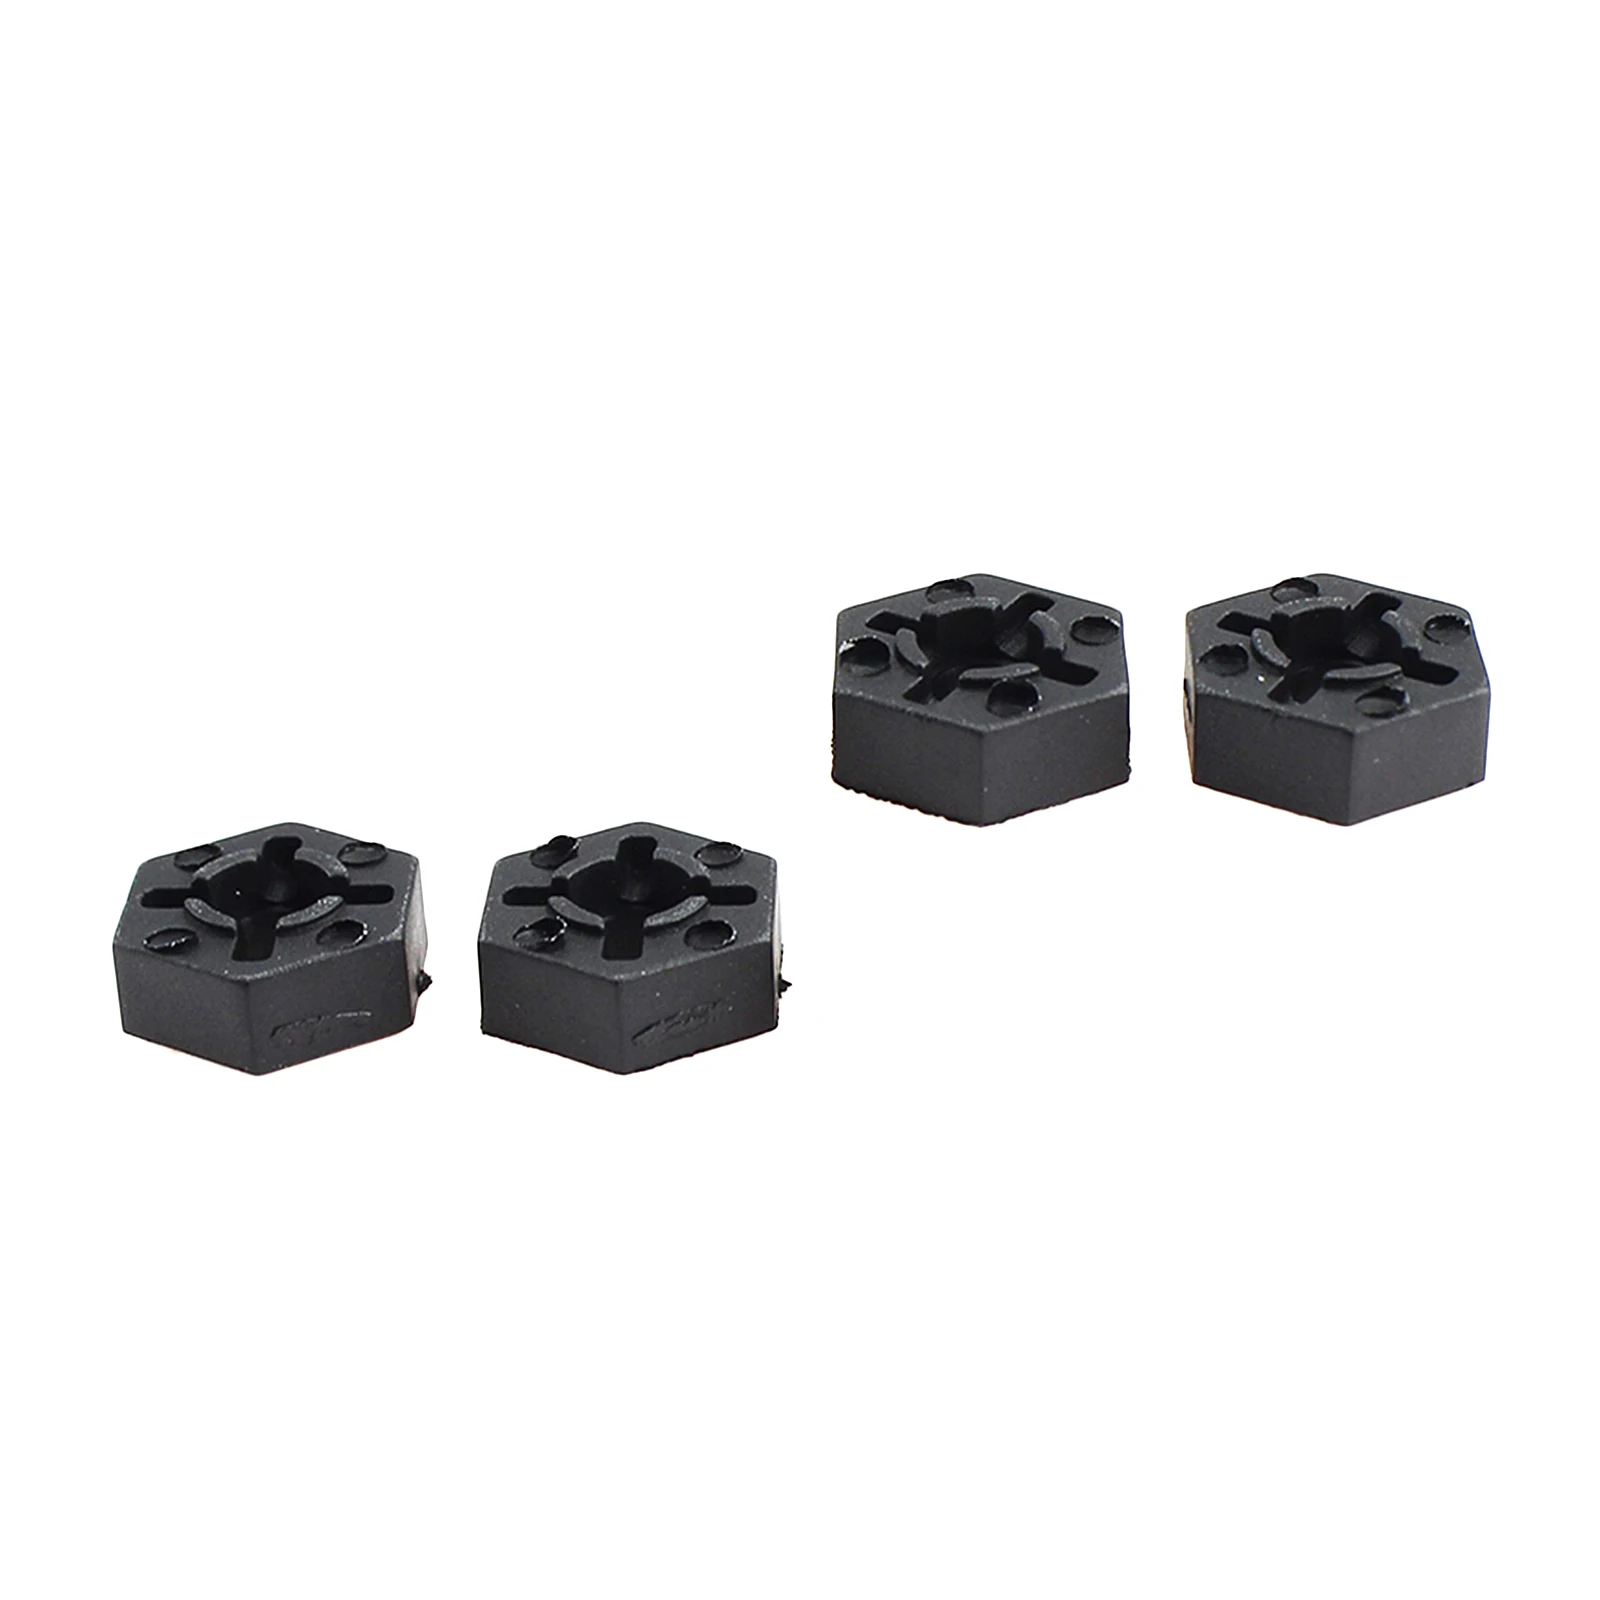 4Pieces RC Car Wheel Hexagonal Drive Hub Adapters for 1:14 Wltoys 144001 RC